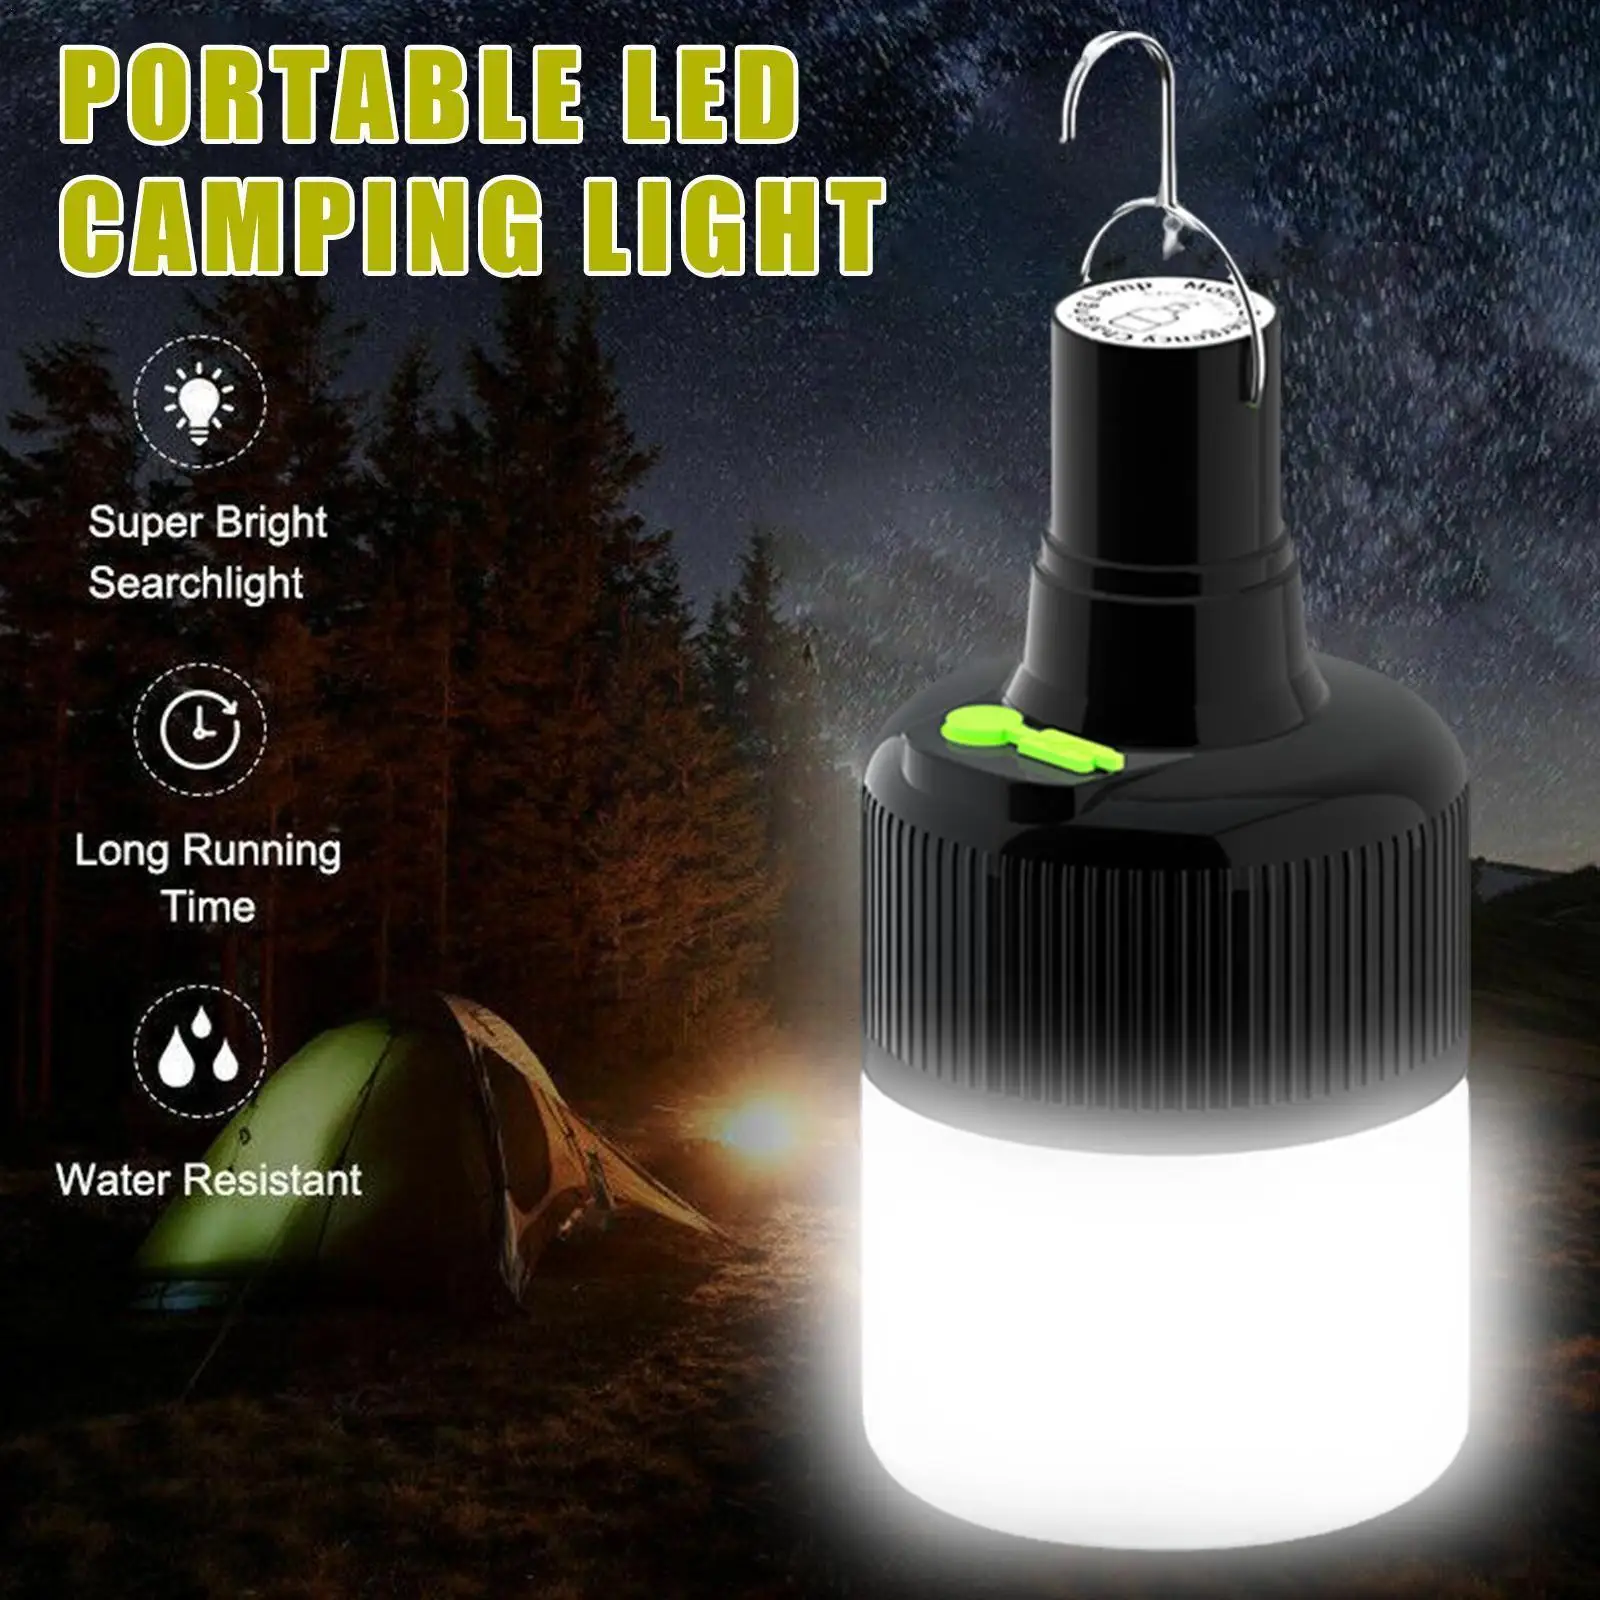 

Usb Rechargeable Emergency Lights Hanging Outdoor Bulb Portable Tent Lamp Battery Lantern Camping Light For Patio Porch Gar L3d0